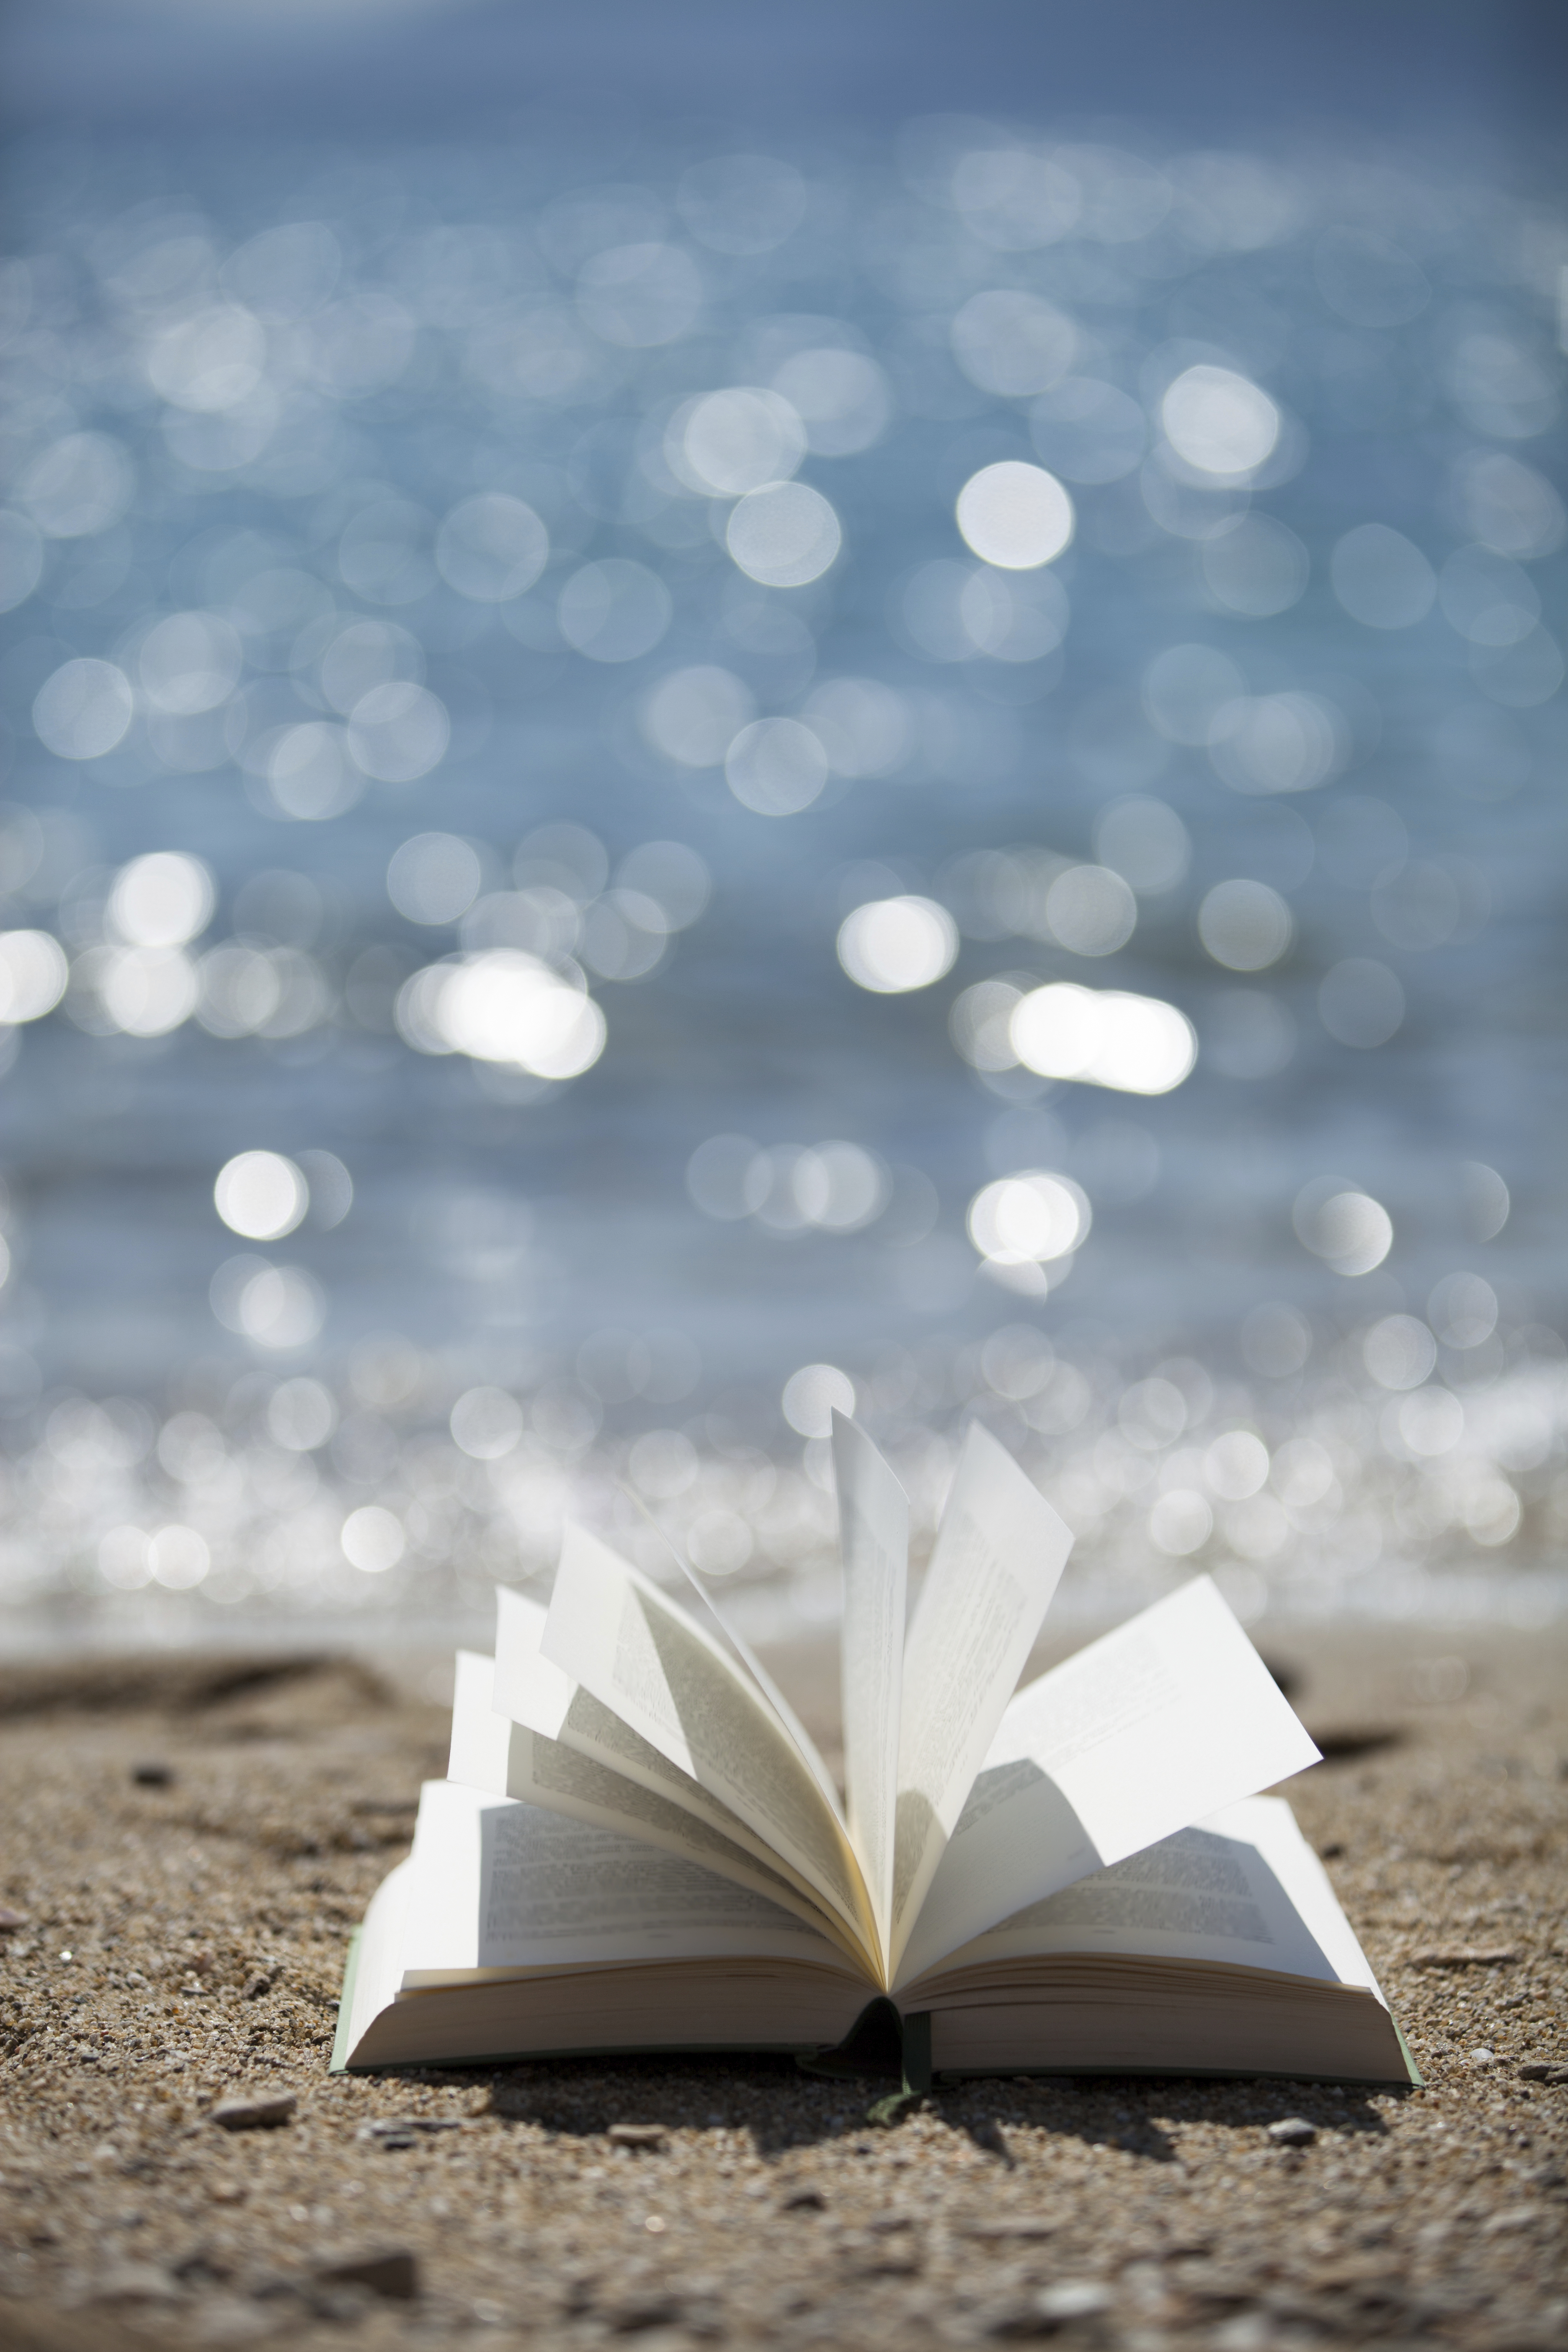 Photo of a book open on the beach